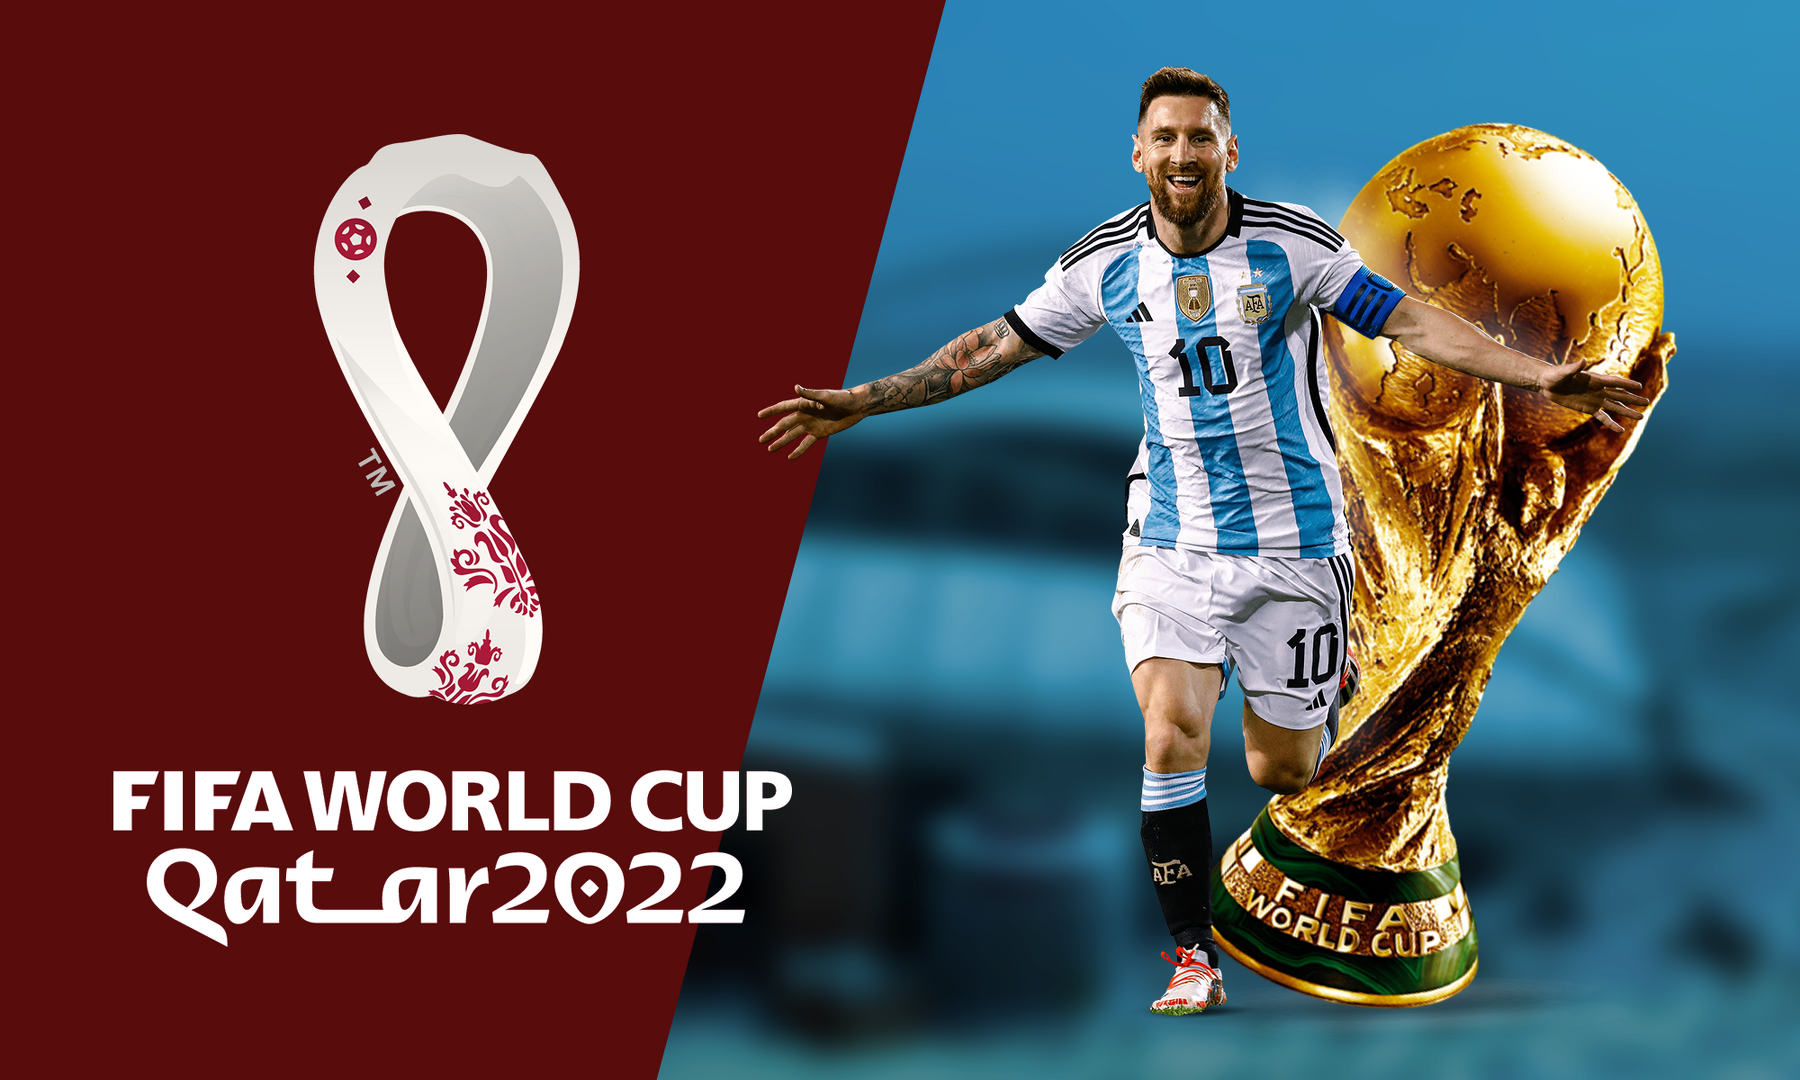 Lionel Messi 2022 World Cup